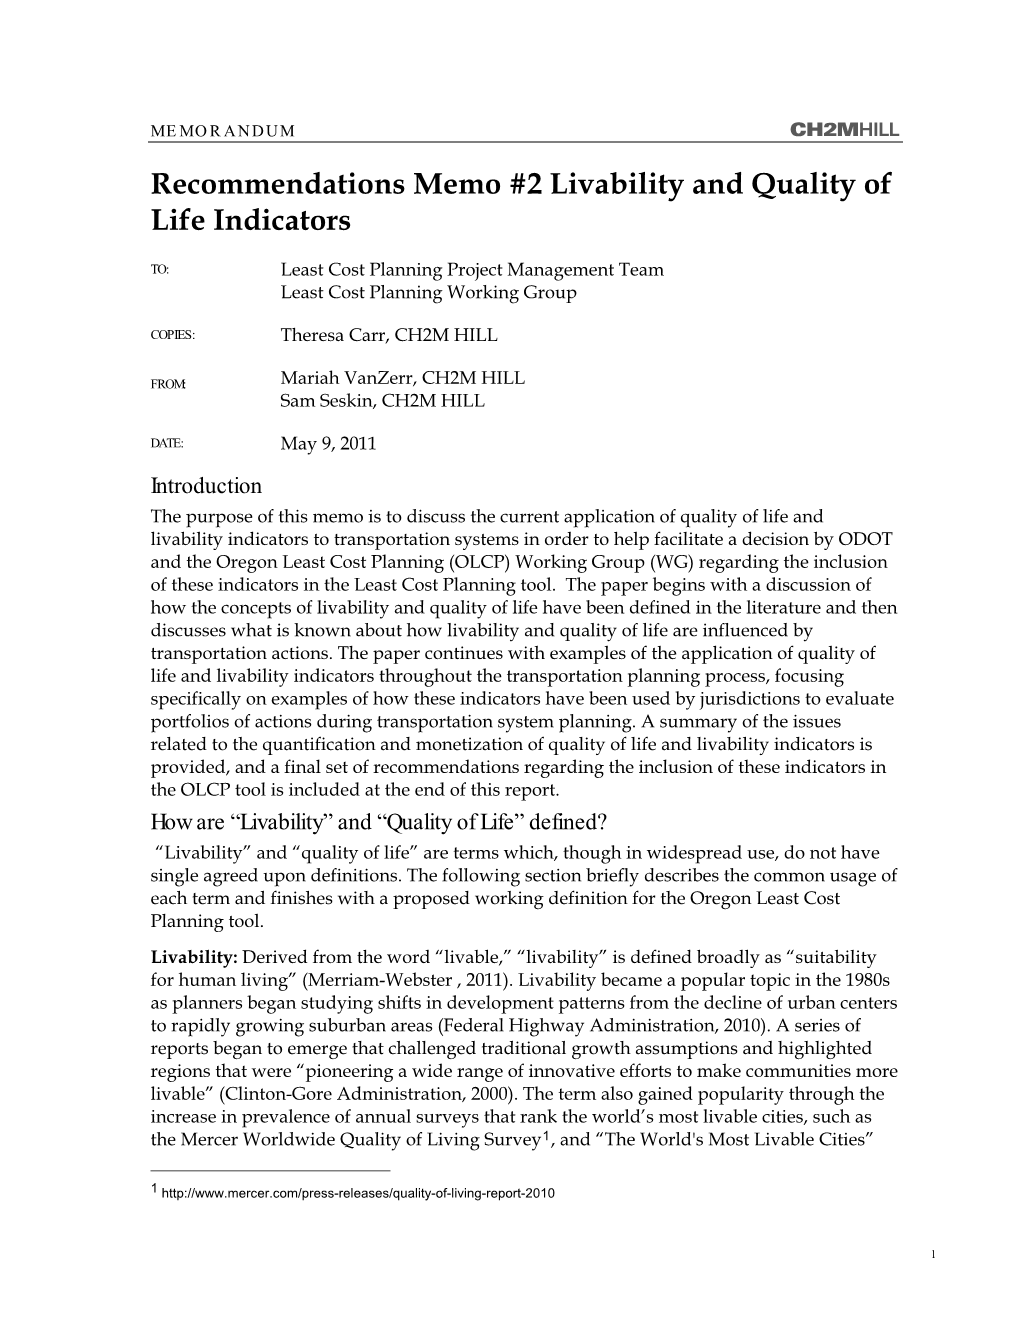 Recommendations Memo #2 Livability and Quality of Life Indicators